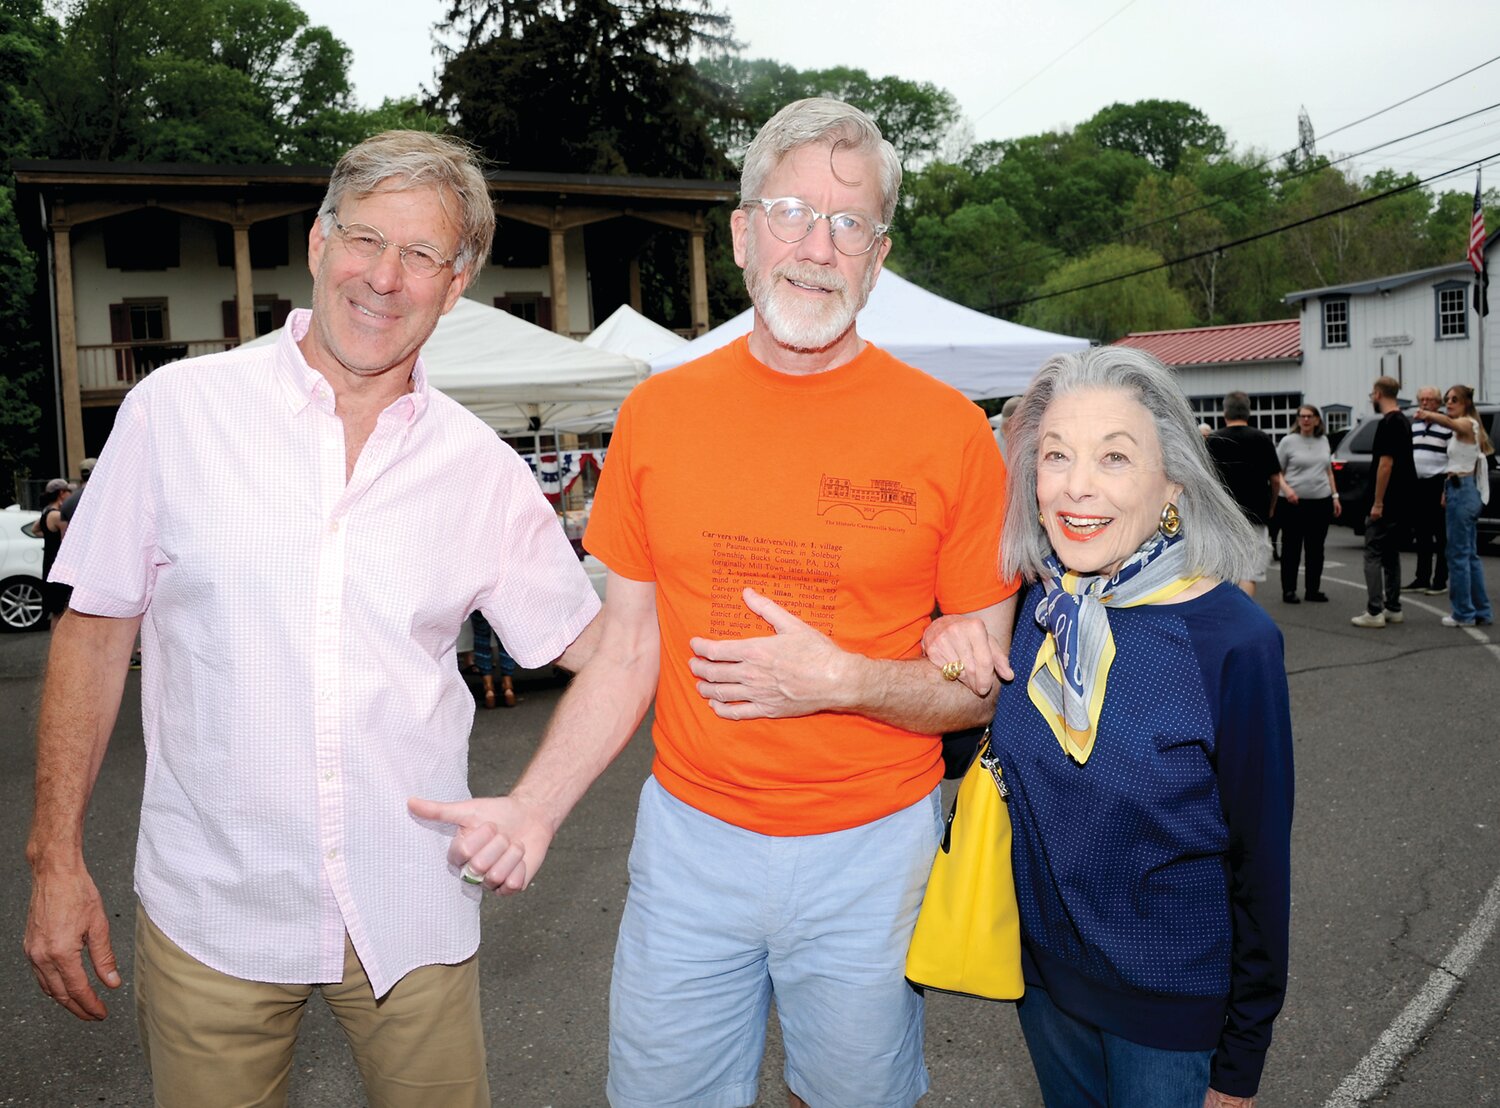 Paul Leventhal, William Holmes and Barbara Schimmell.